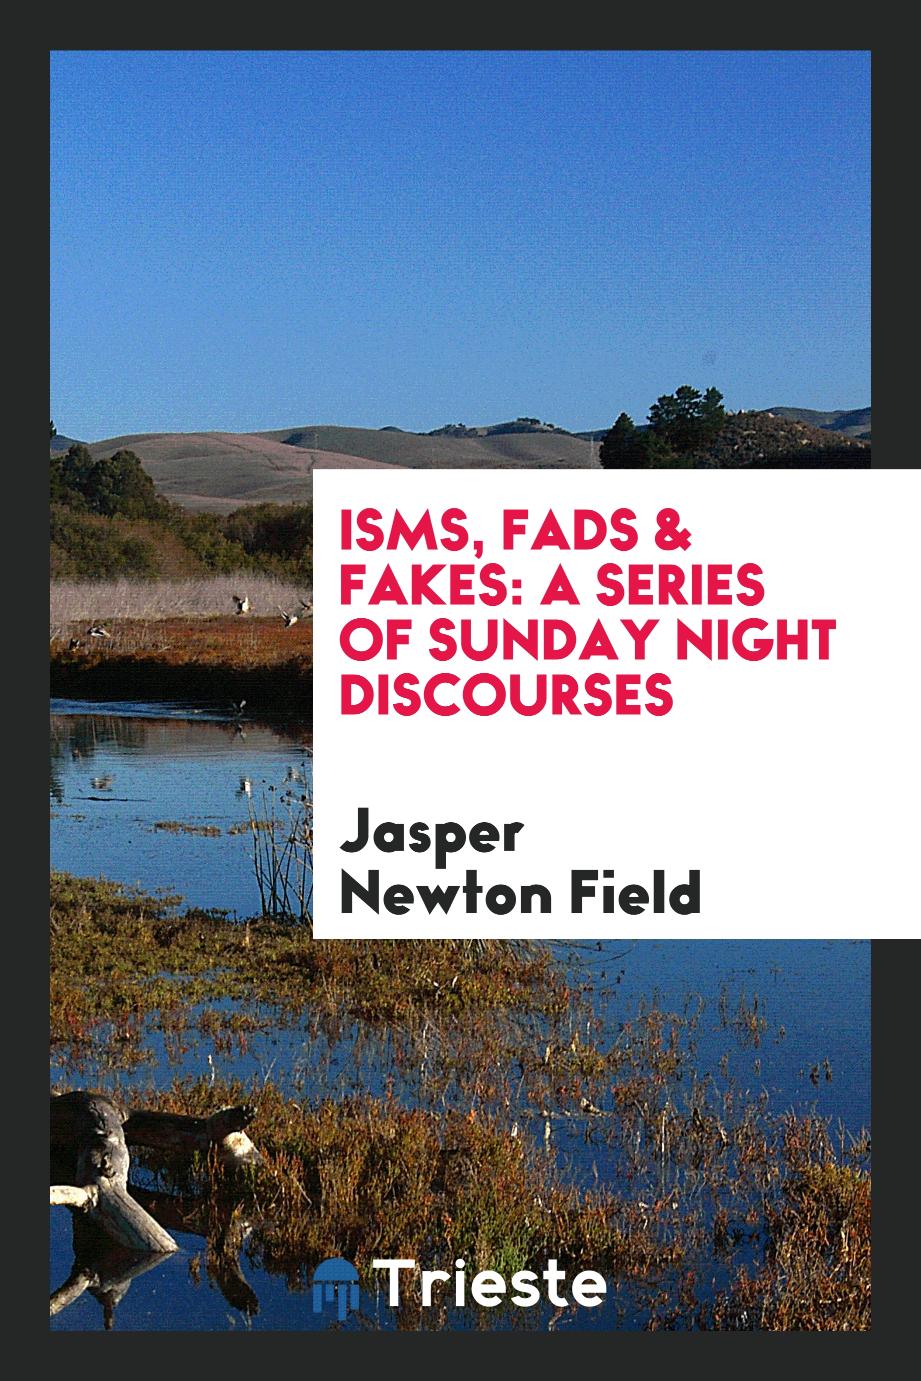 Isms, Fads & Fakes: A Series of Sunday Night Discourses